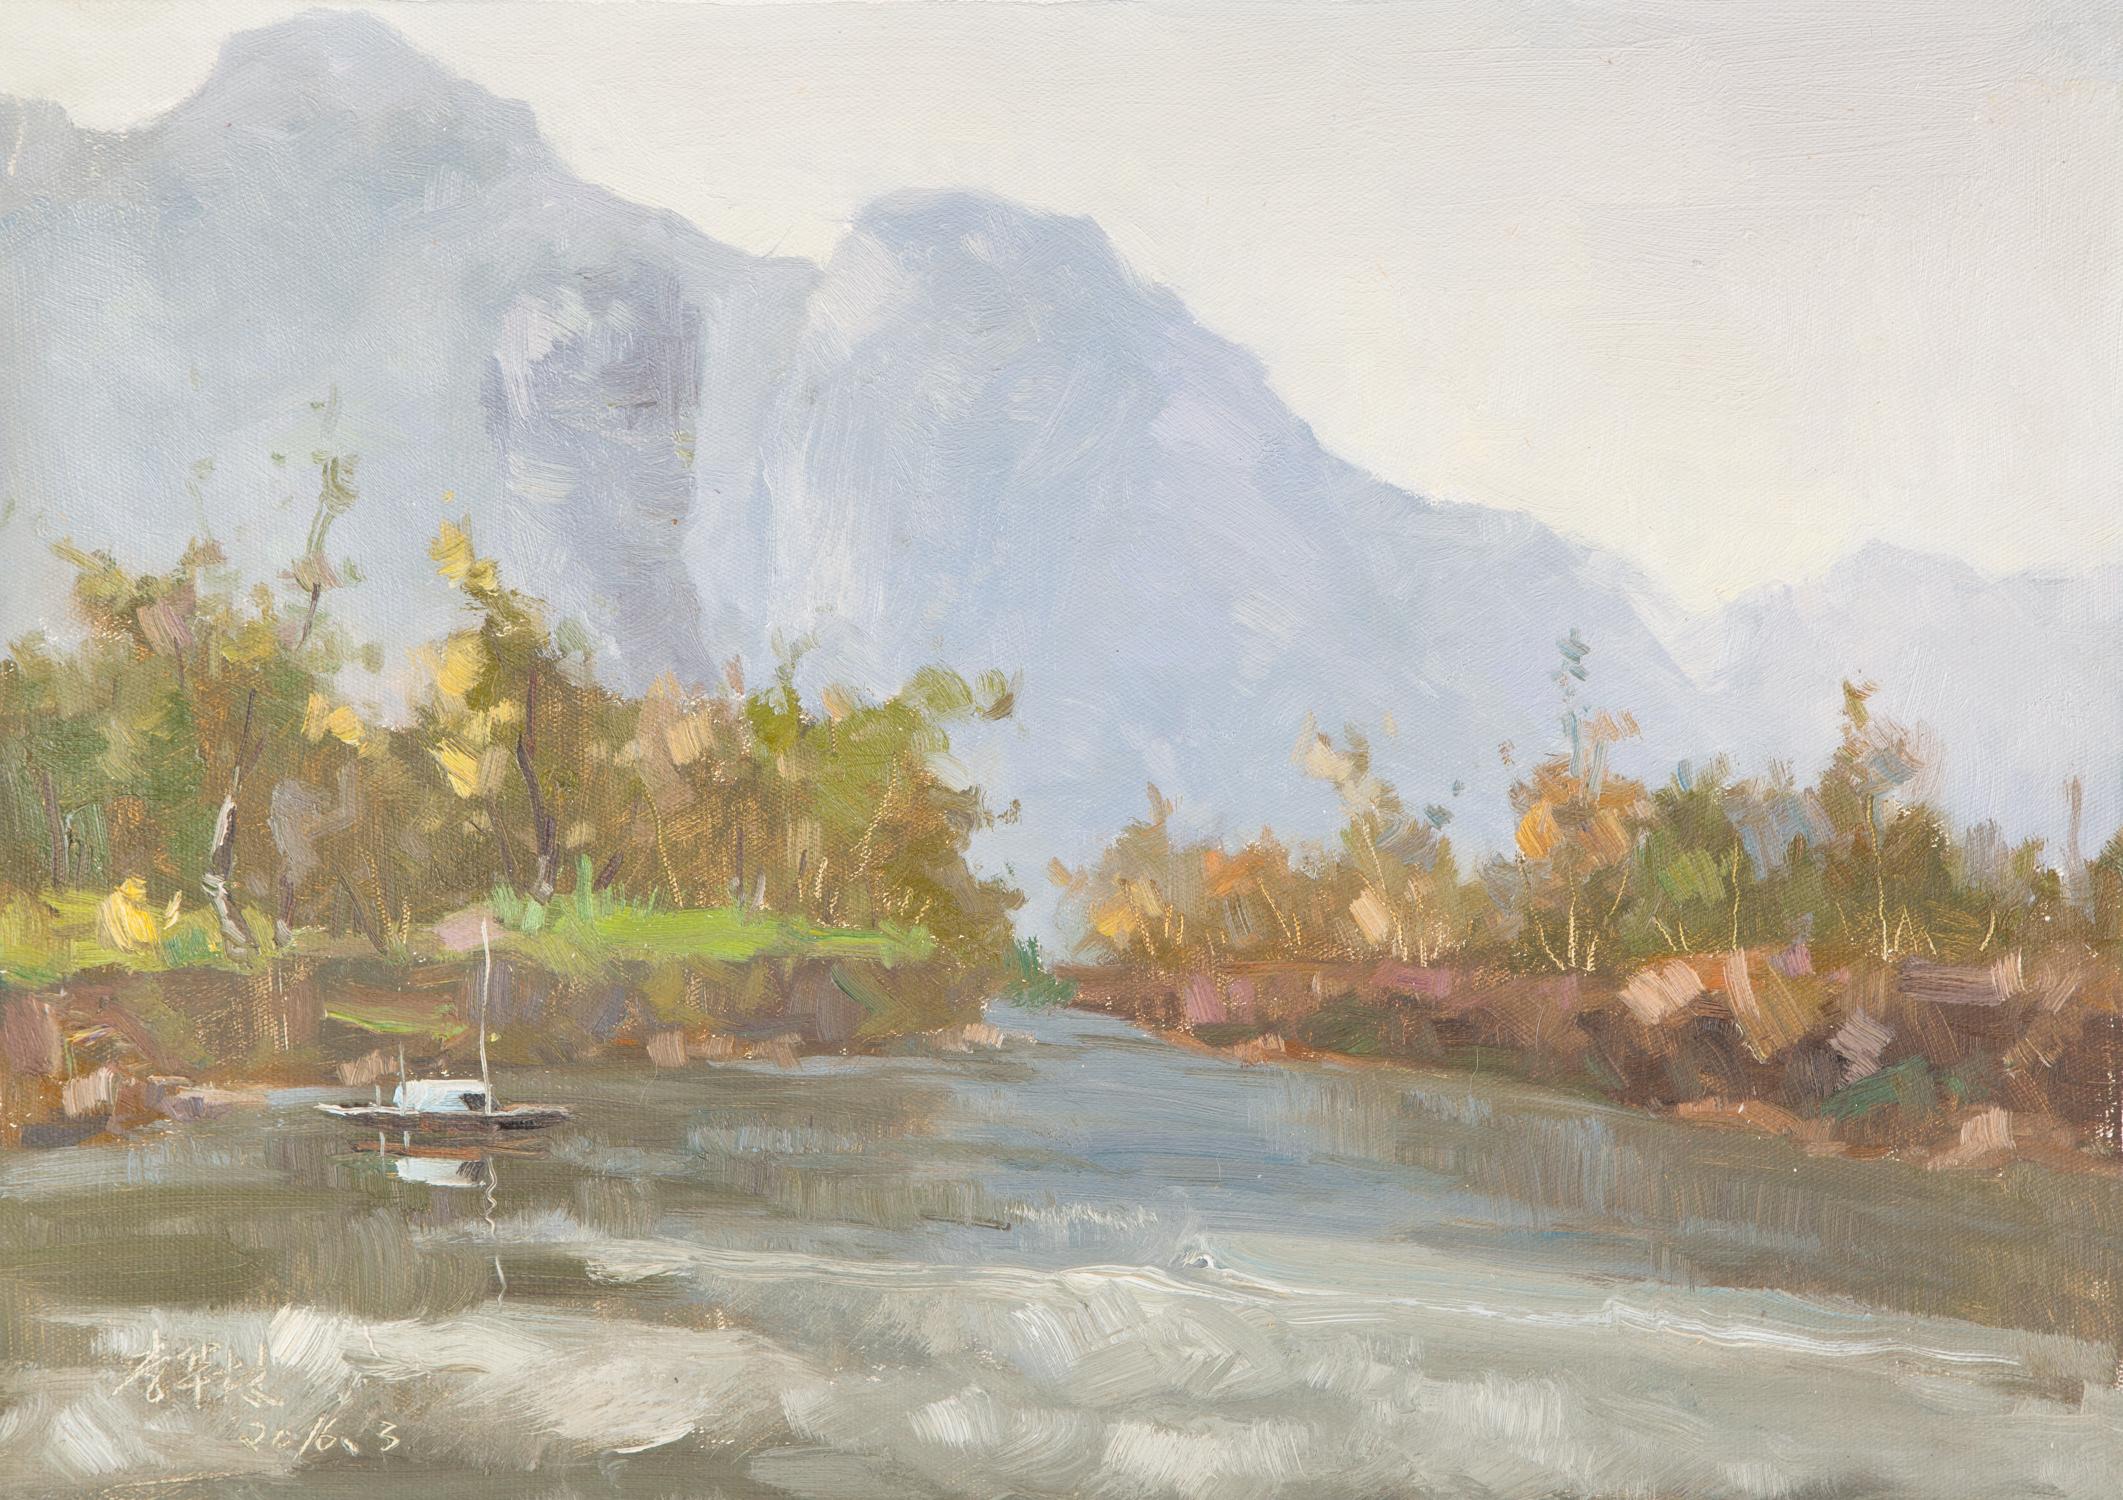  Title: Running River By The Mountain
 Medium: Oil on canvas
 Size: 27.25 x 19.5inches
 Frame: Framing options available!
 Age: 2000s
 Condition: Painting appears to be in excellent condition.
 Note: This painting is unstretched
 Artist: Hualin Li
